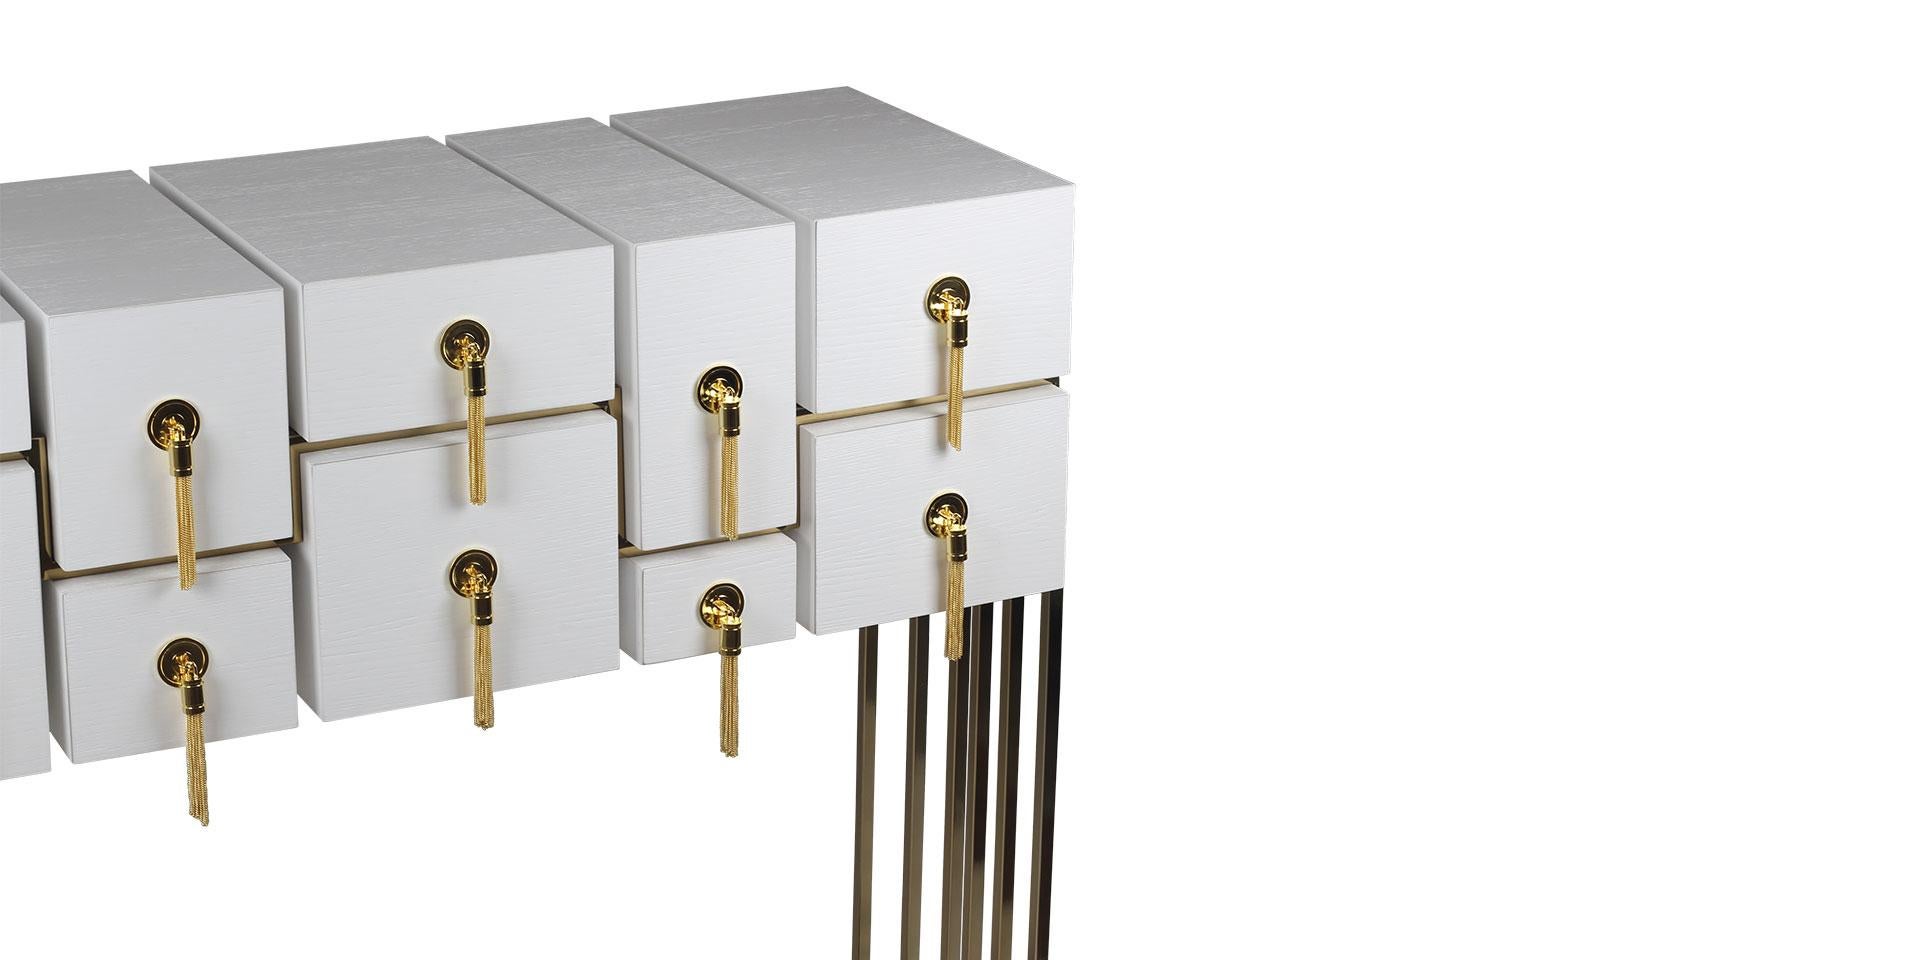 This is the modern design style of the Lungta console, a hymn to the interior design practice. It´s an iconic piece of furniture with wonderful gold lines, capable of inspiring luxury interiors. Financial Times has recommended it in the 